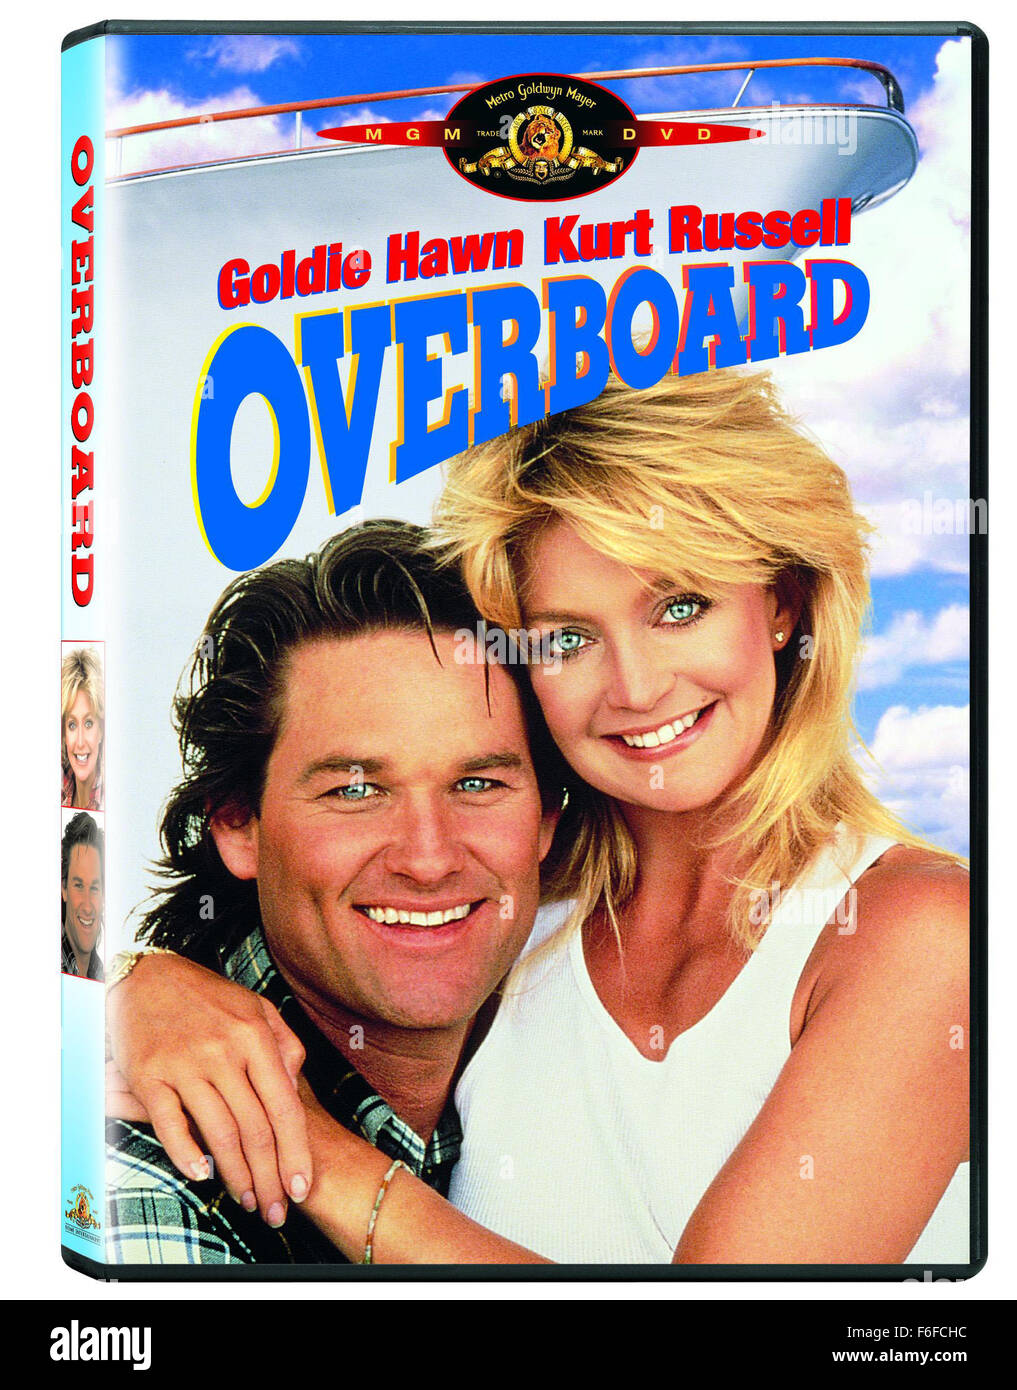 RELEASE DATE: December 16, 1987. MOVIE TITLE: Overboard. STUDIO: MGM. PLOT: Joanna Slayton is very rich and very spoiled. When she falls overboard from her yacht in the harbor of a small Oregon town she develops amnesia. She's taken in by Dean Profitt, a local carpenter she's previously maligned. Profitt, in revenge, persuades her that she is his wife and the mother of his four boys. Eventually, theyhumanize her and even when her memory returns she realizes she has fallen in love with Dean and his boys. PICTURED: GOLDIE HAWN as Joanna Stayton / Annie Proffitt and KURT RUSSELL as Dean Proffi Stock Photo